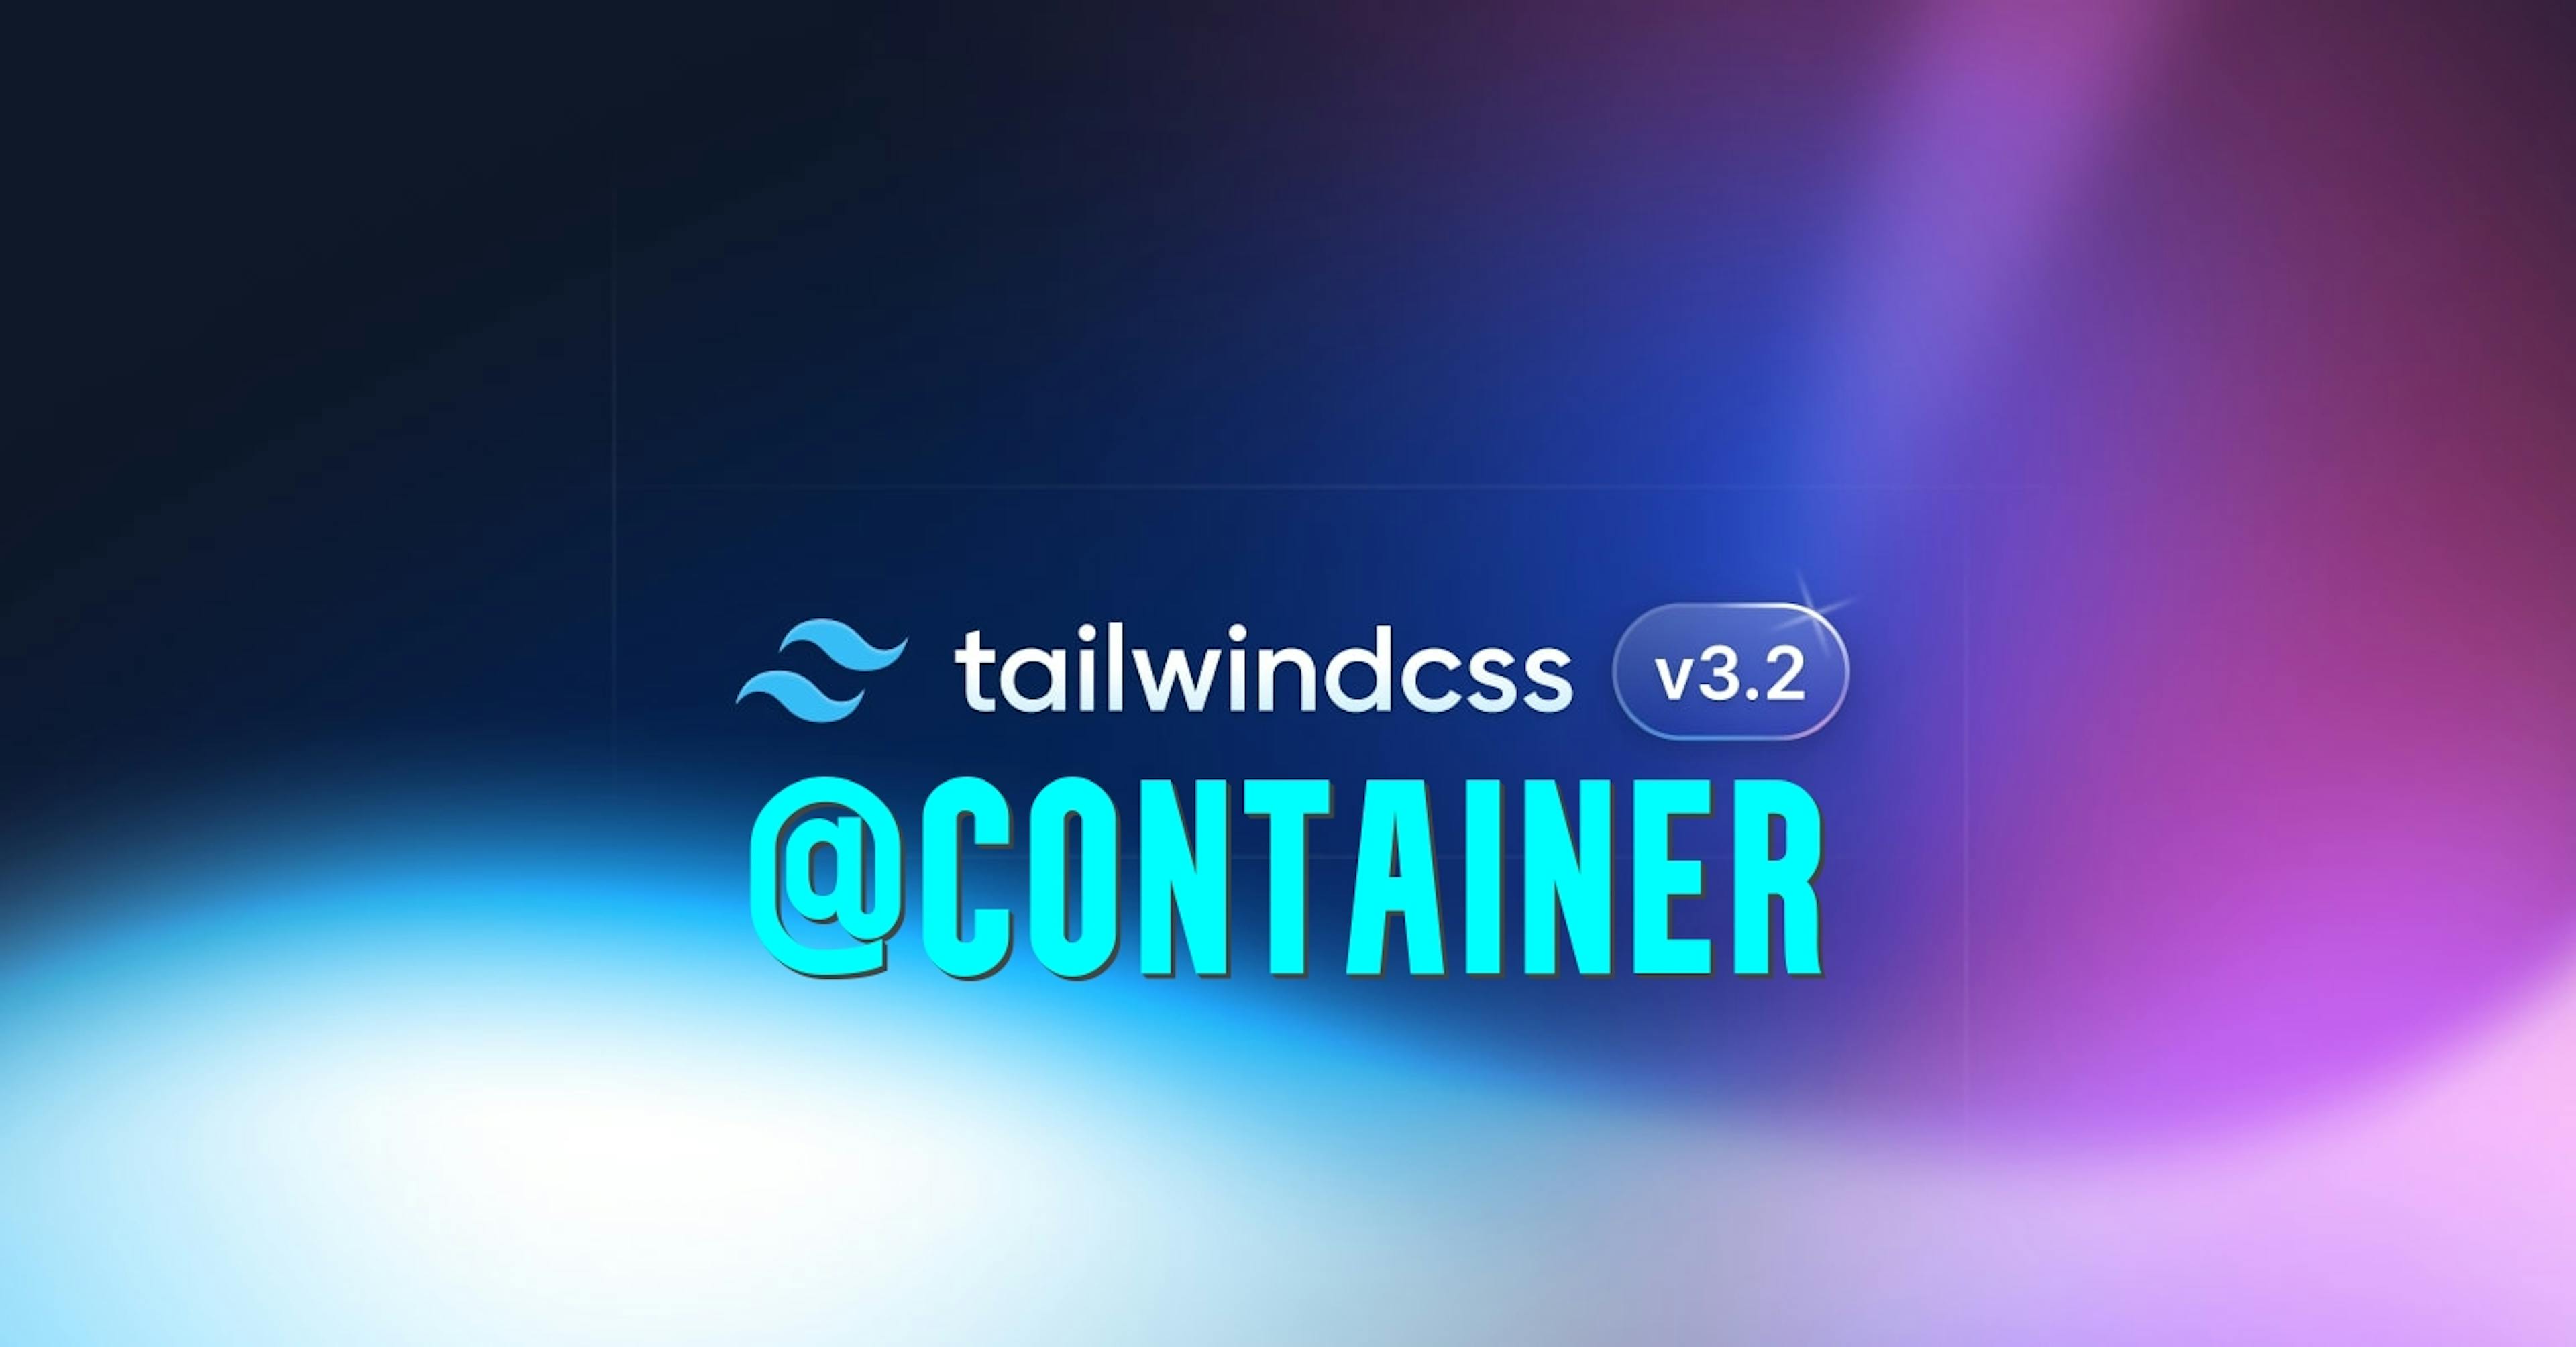 tailwindcss logo with @container super imposed